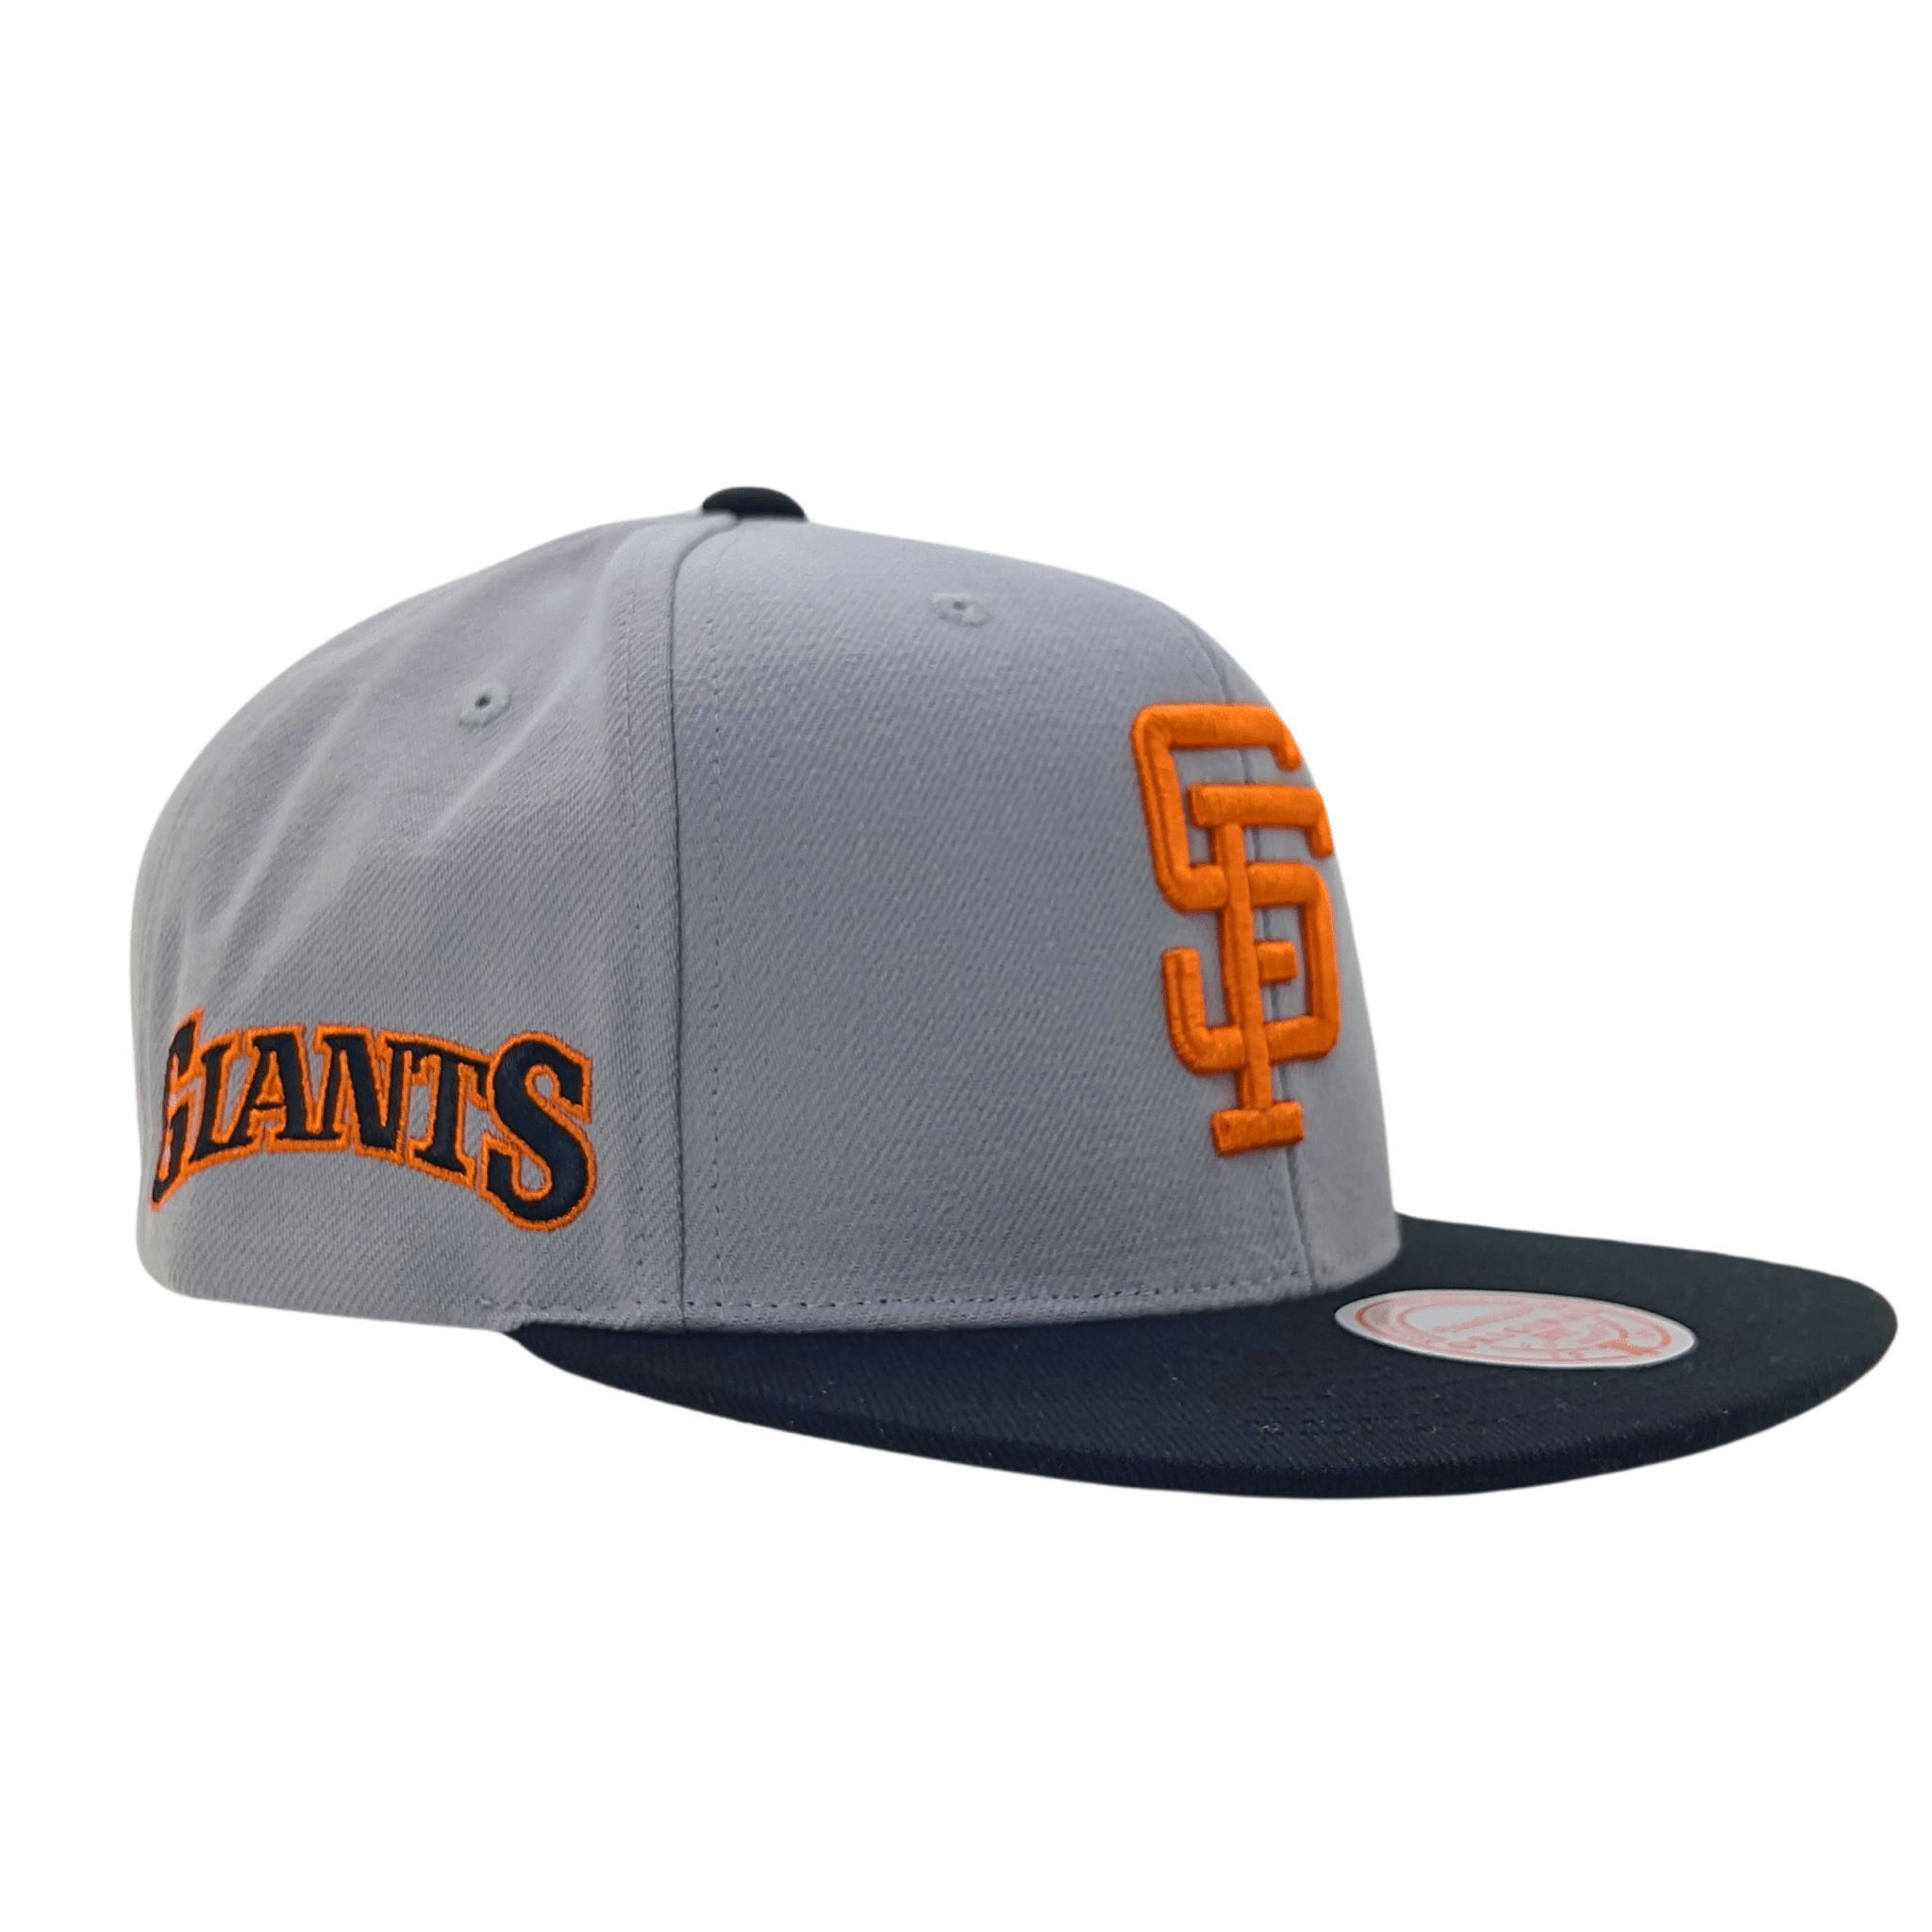 San Francisco Giants Away Cooperstown Snapback Hat in grey and black